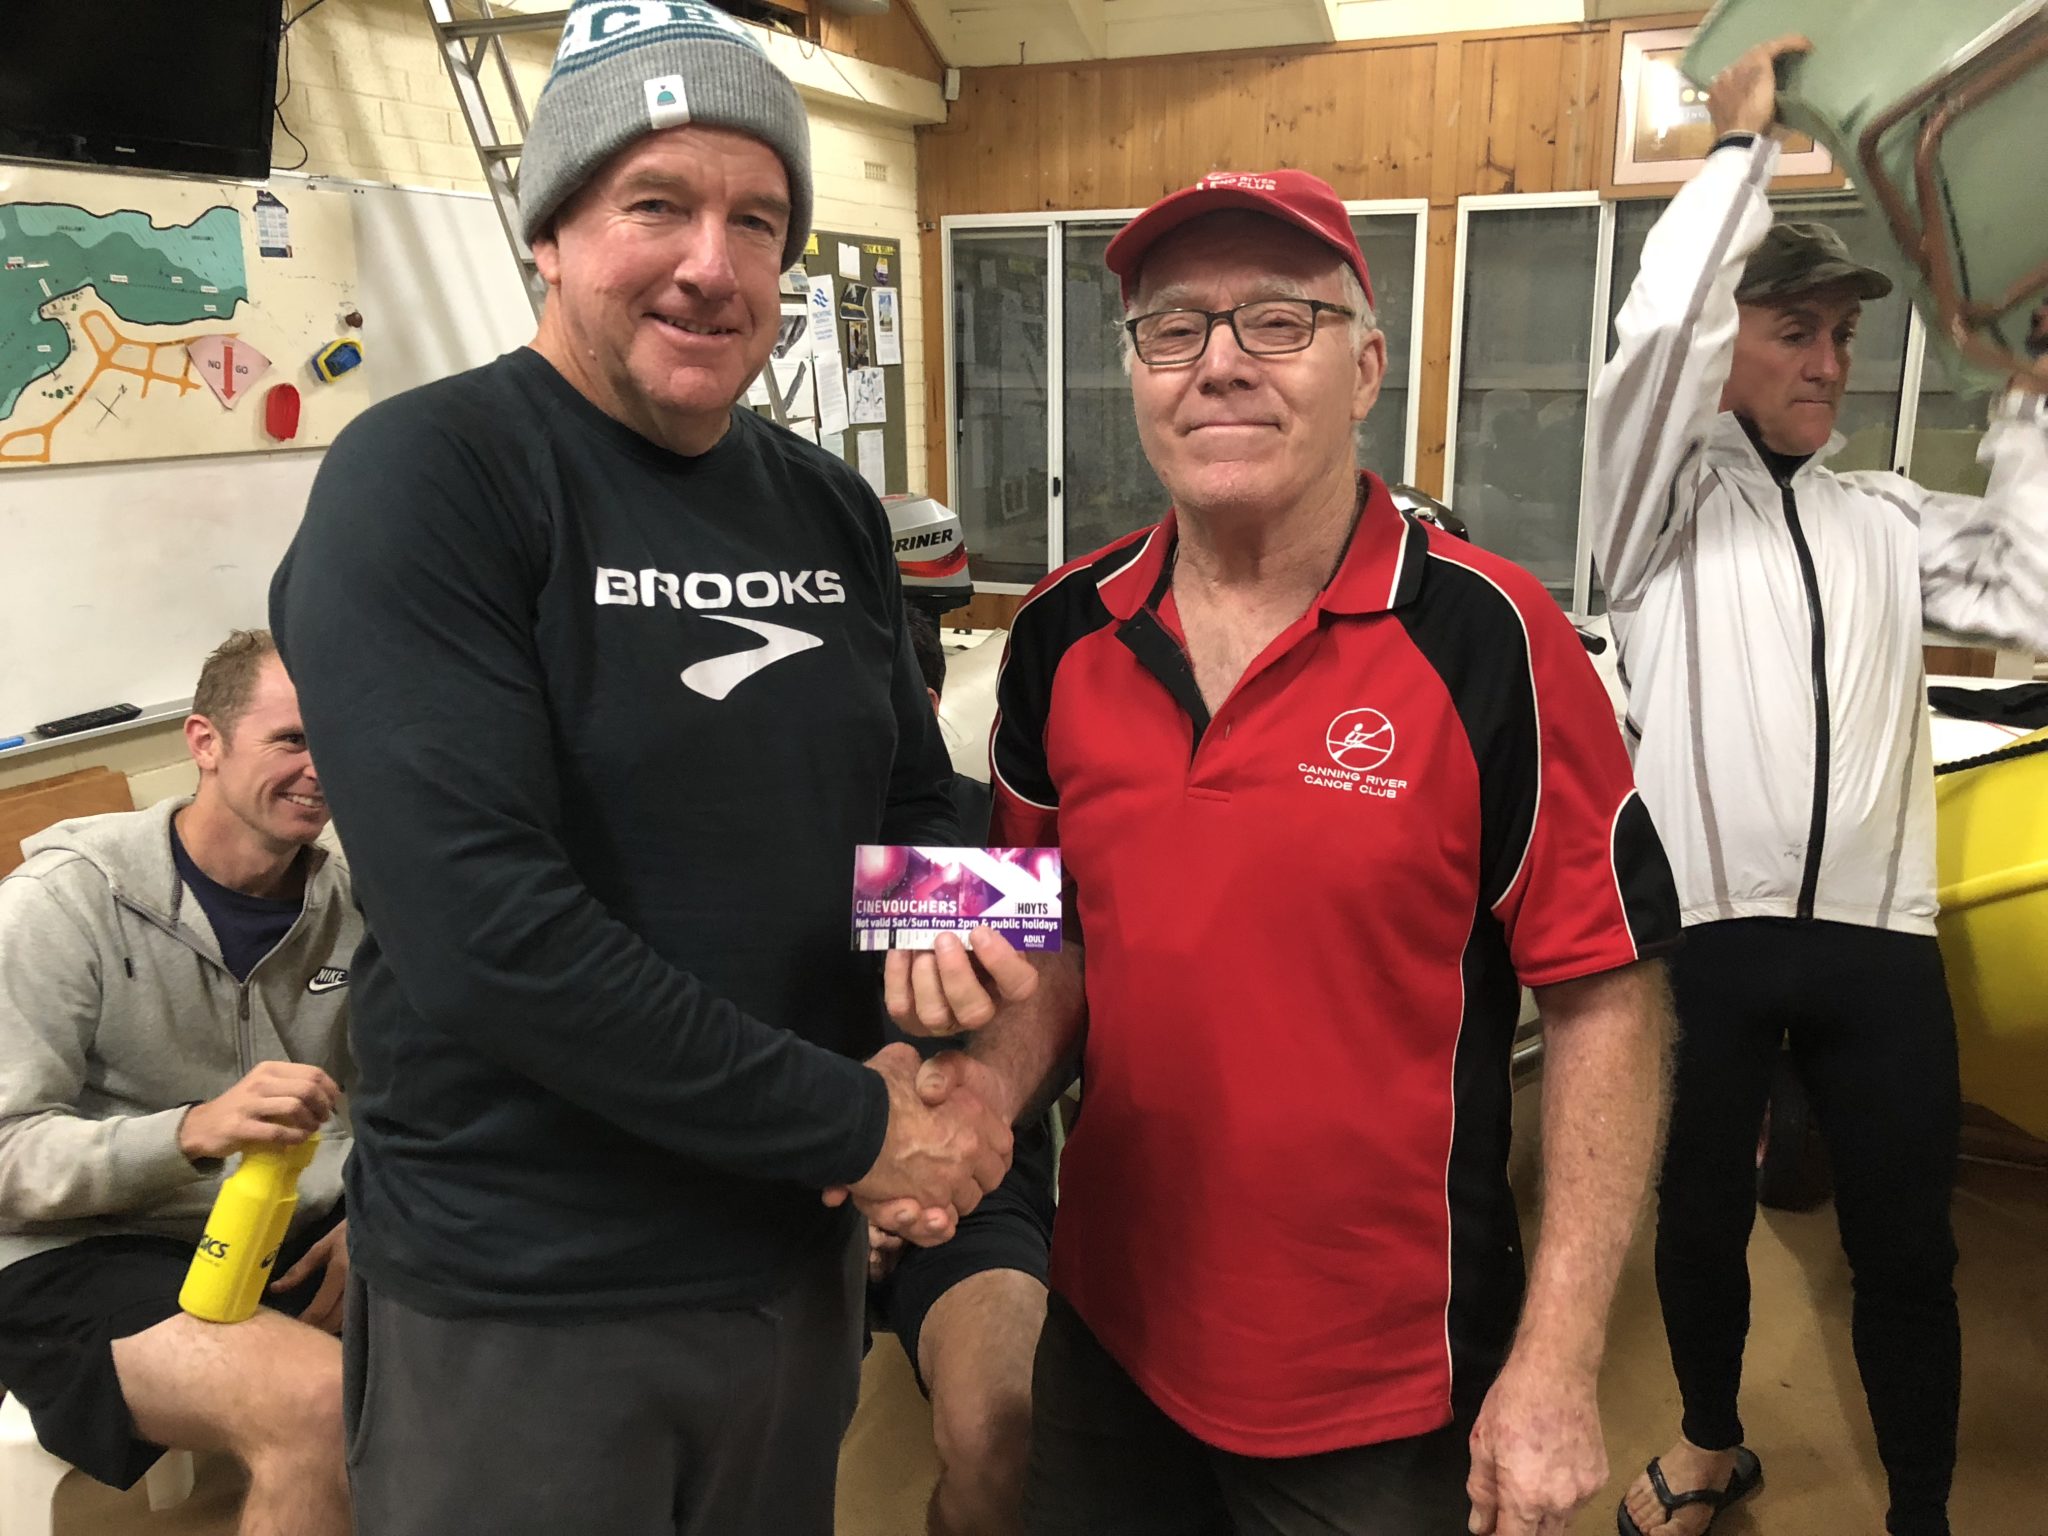 Tuesday 8th May 2018 : Tonights photo shows club member David Gardiner presenting Steve Mitchinson with a movie voucher